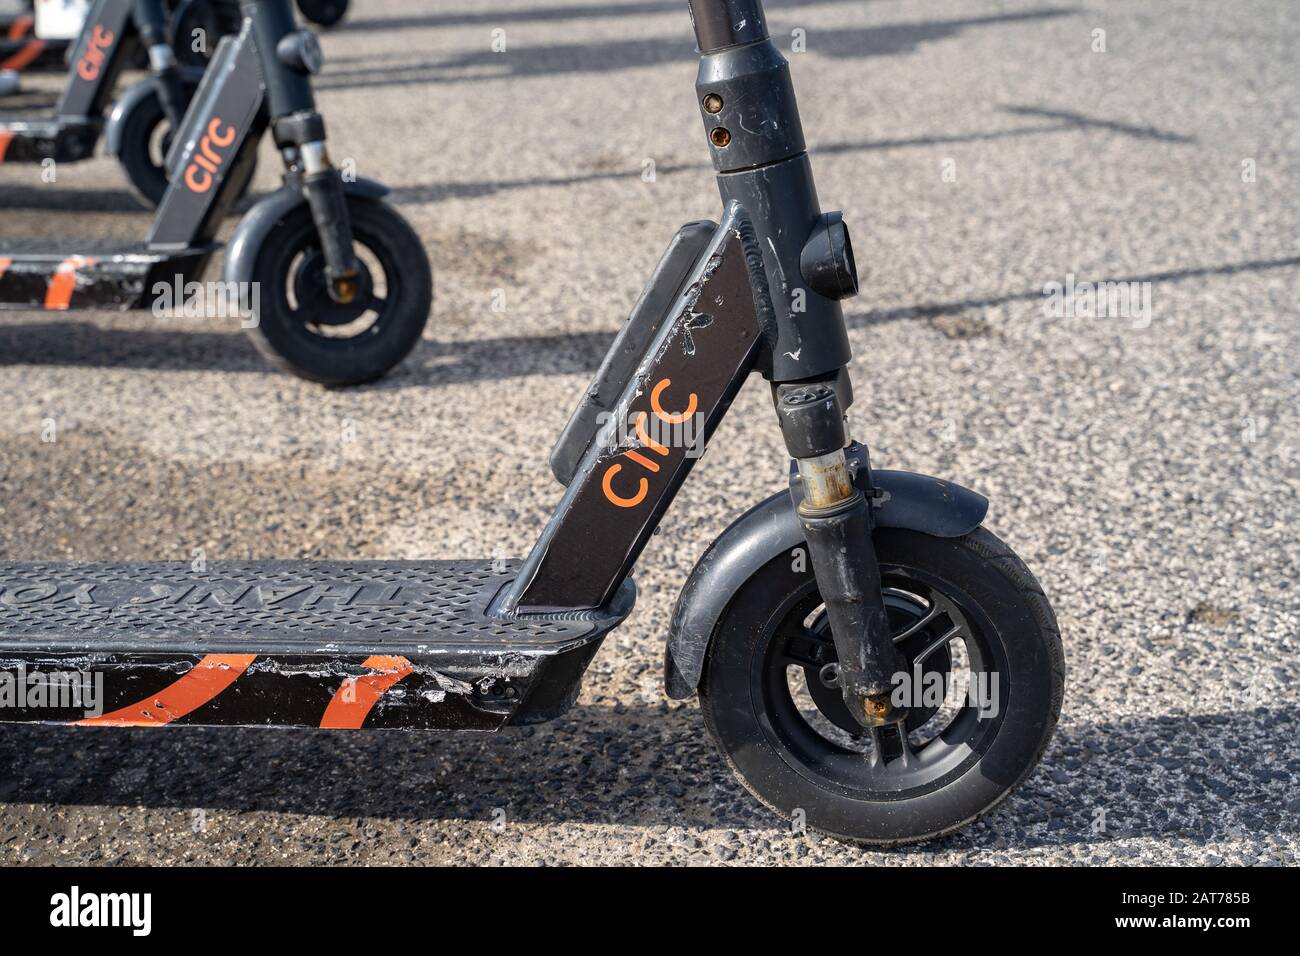 Micro Scooters High Resolution Stock Photography and Images - Alamy